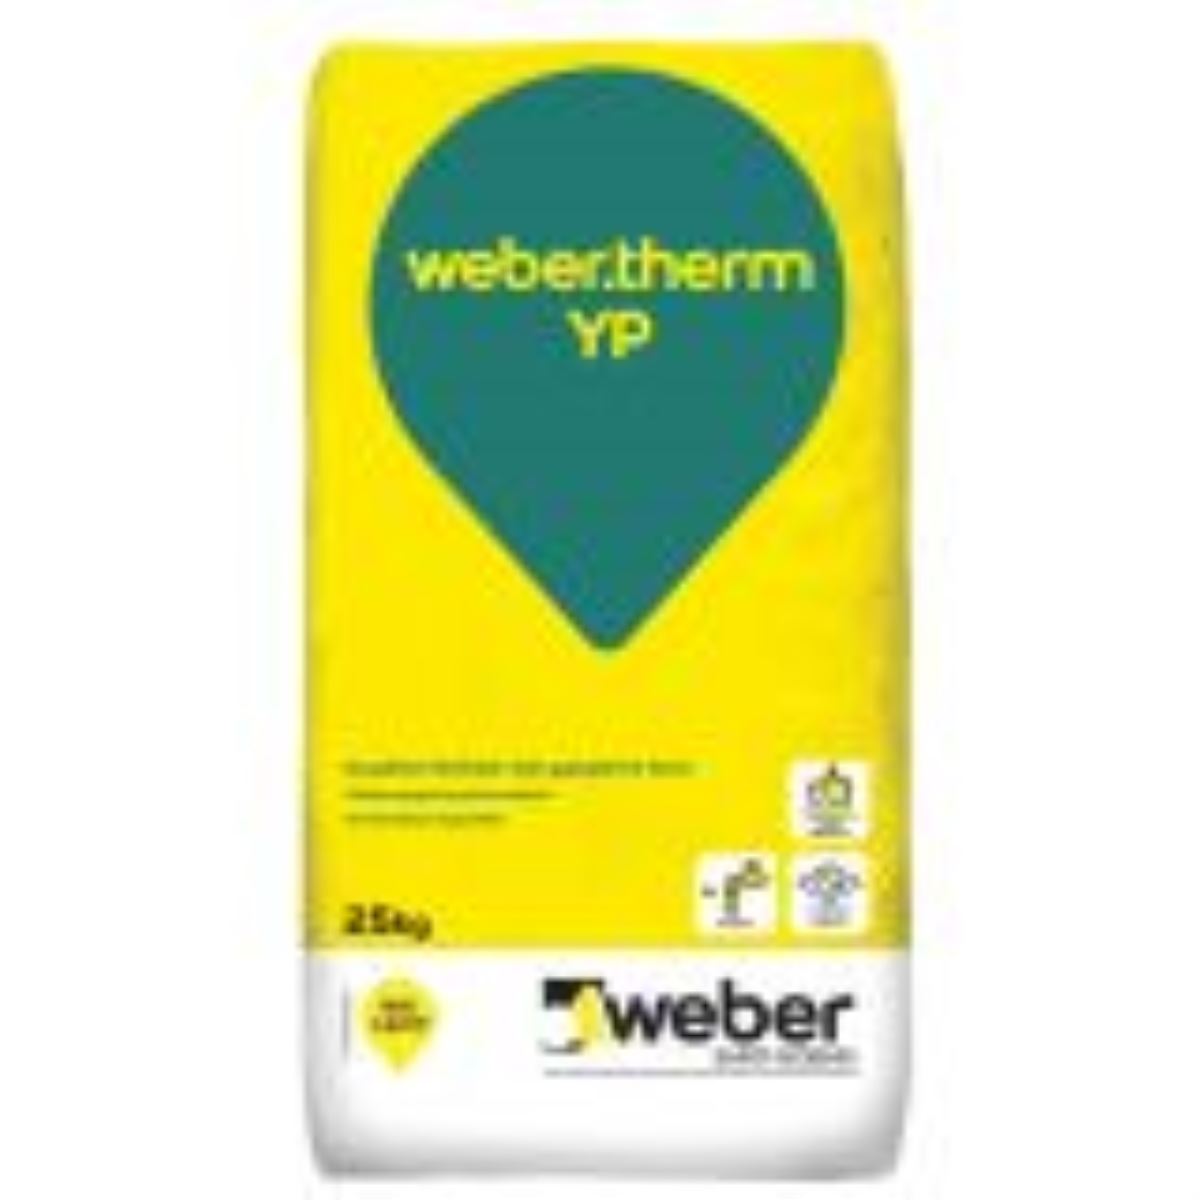 Weber Therm YP